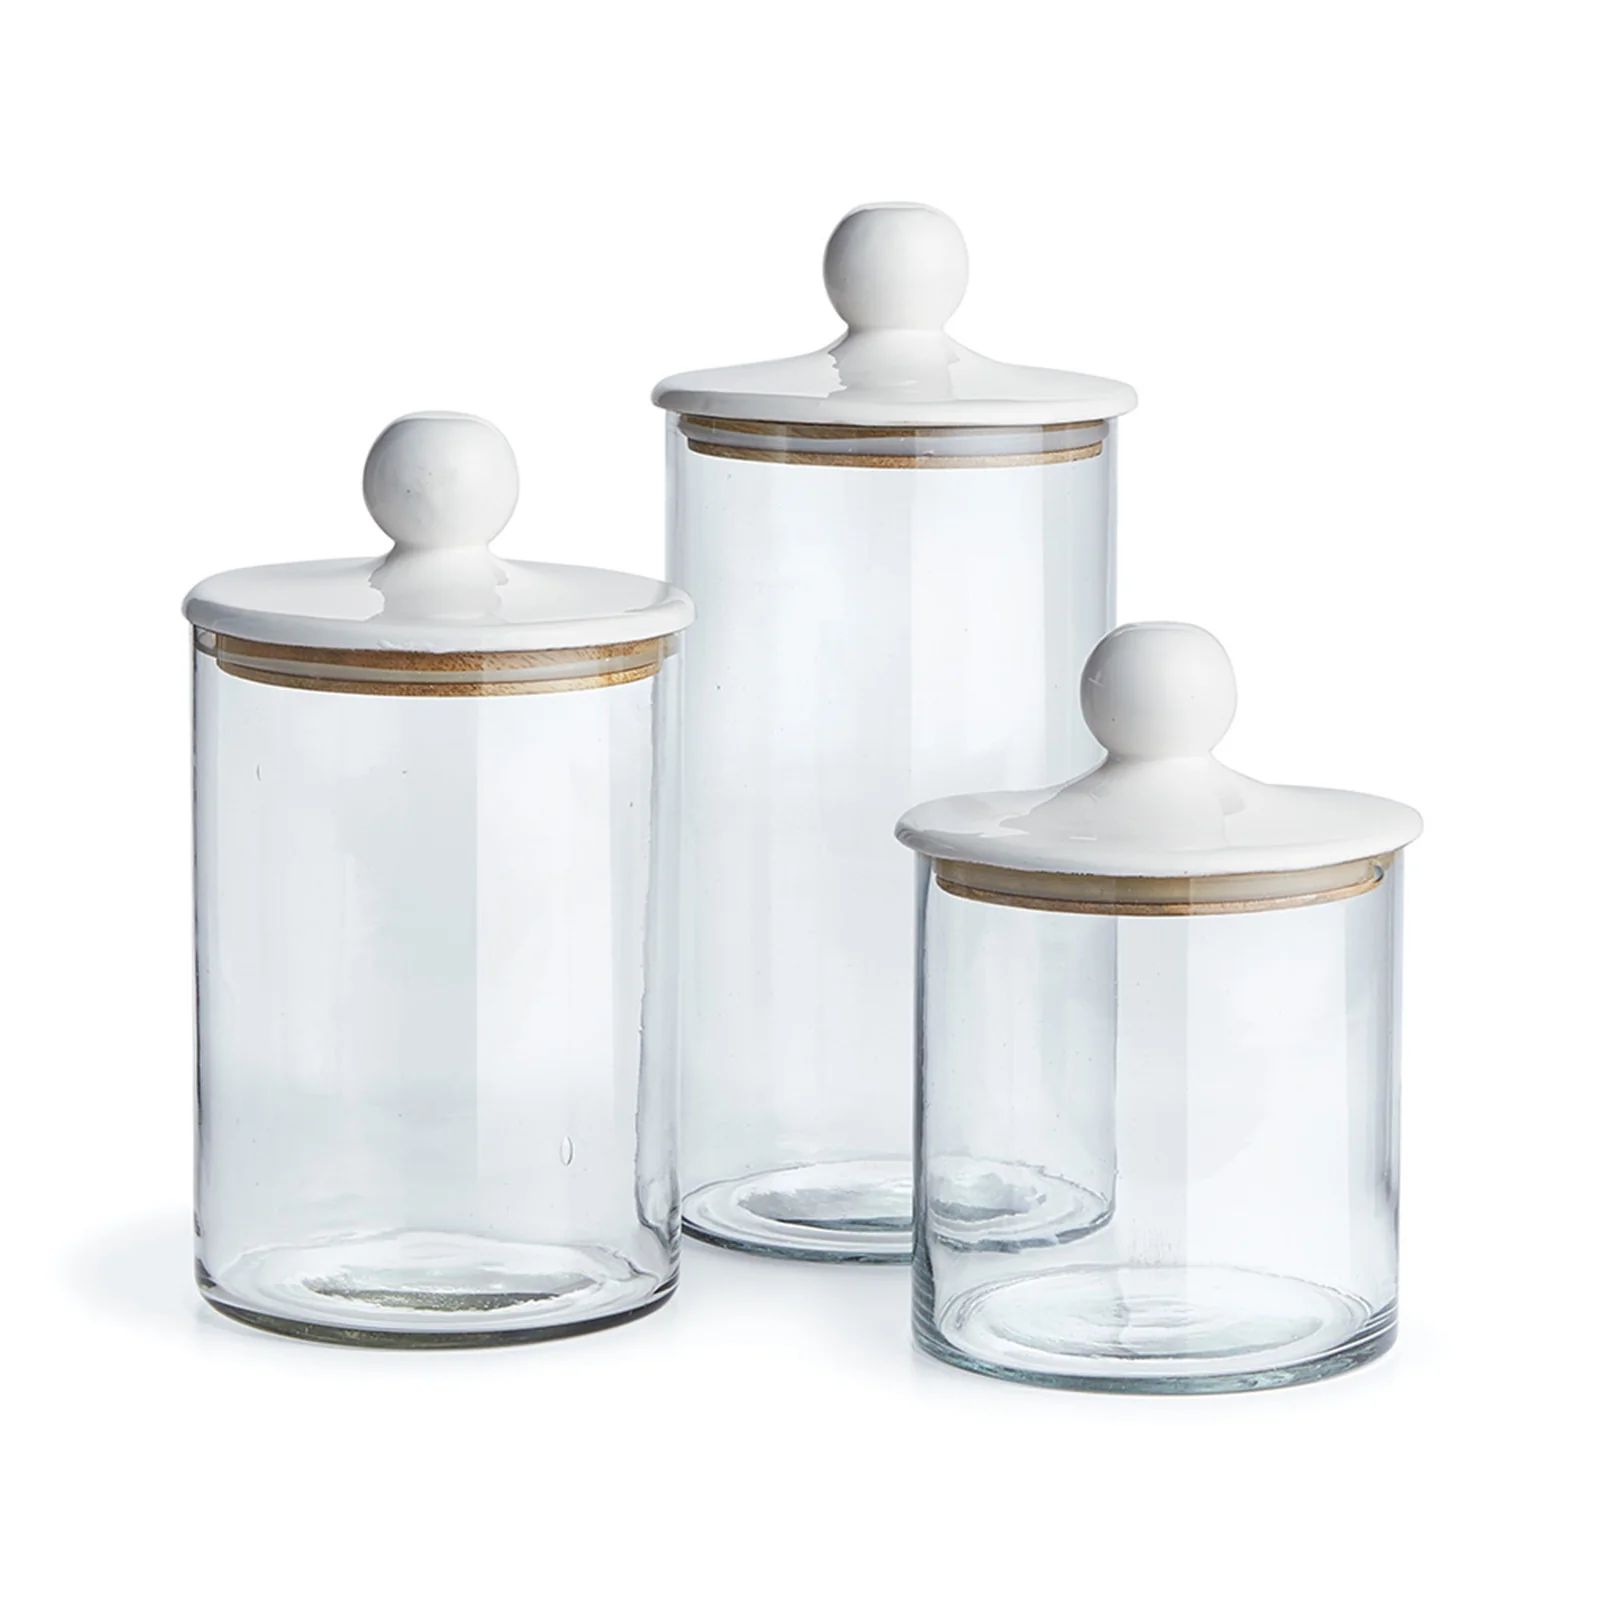 Glass Canisters With White Lids | Brooke and Lou